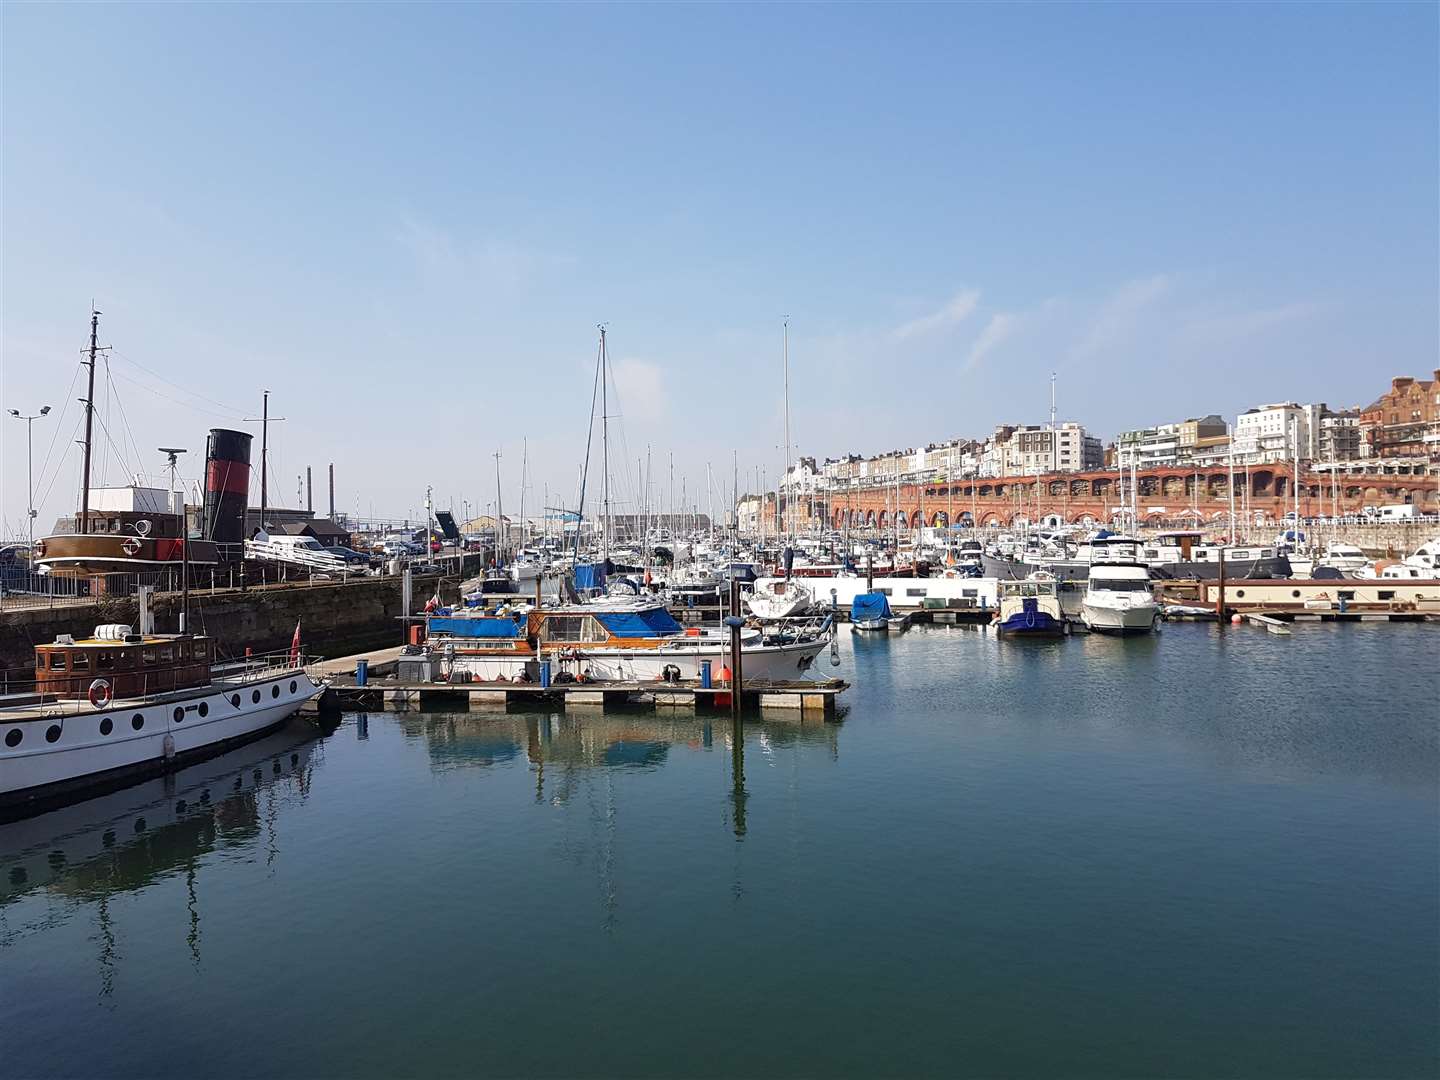 Ramsgate Marina is a truly picturesque spot in the summer